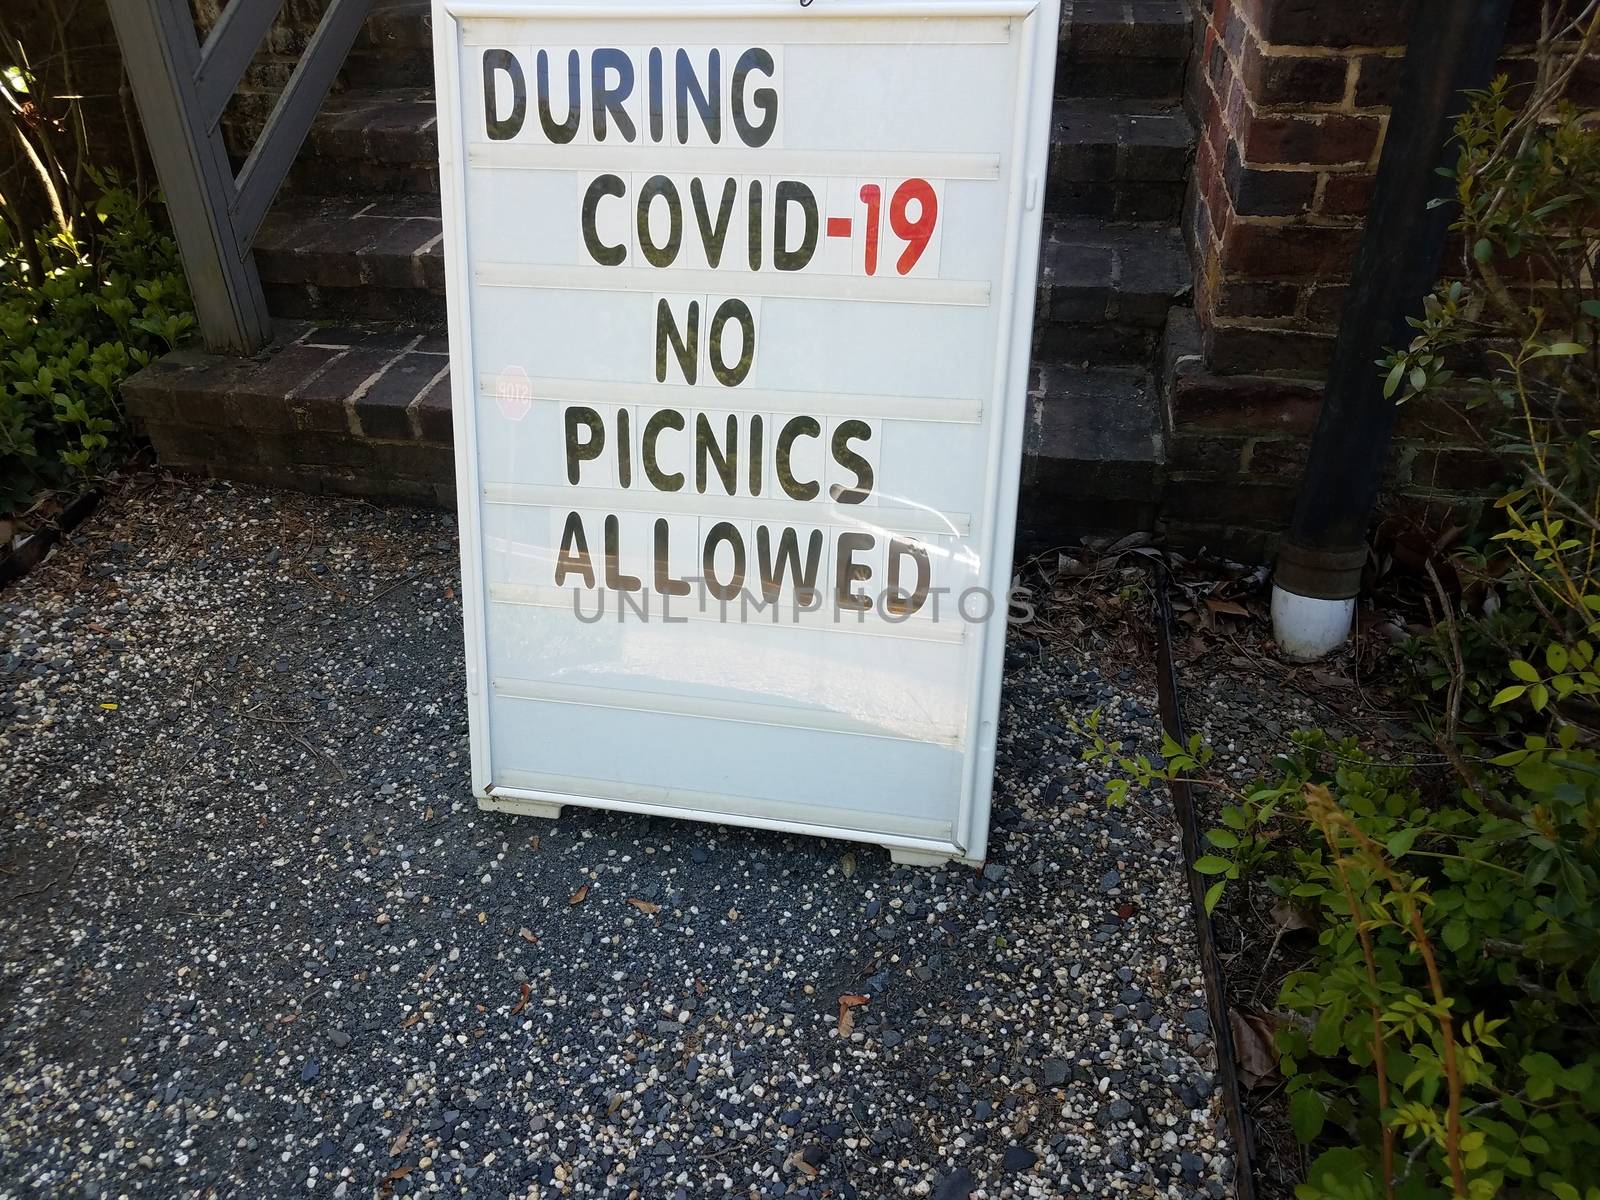 during covid 19 no picnics allowed sign on rocks by stockphotofan1